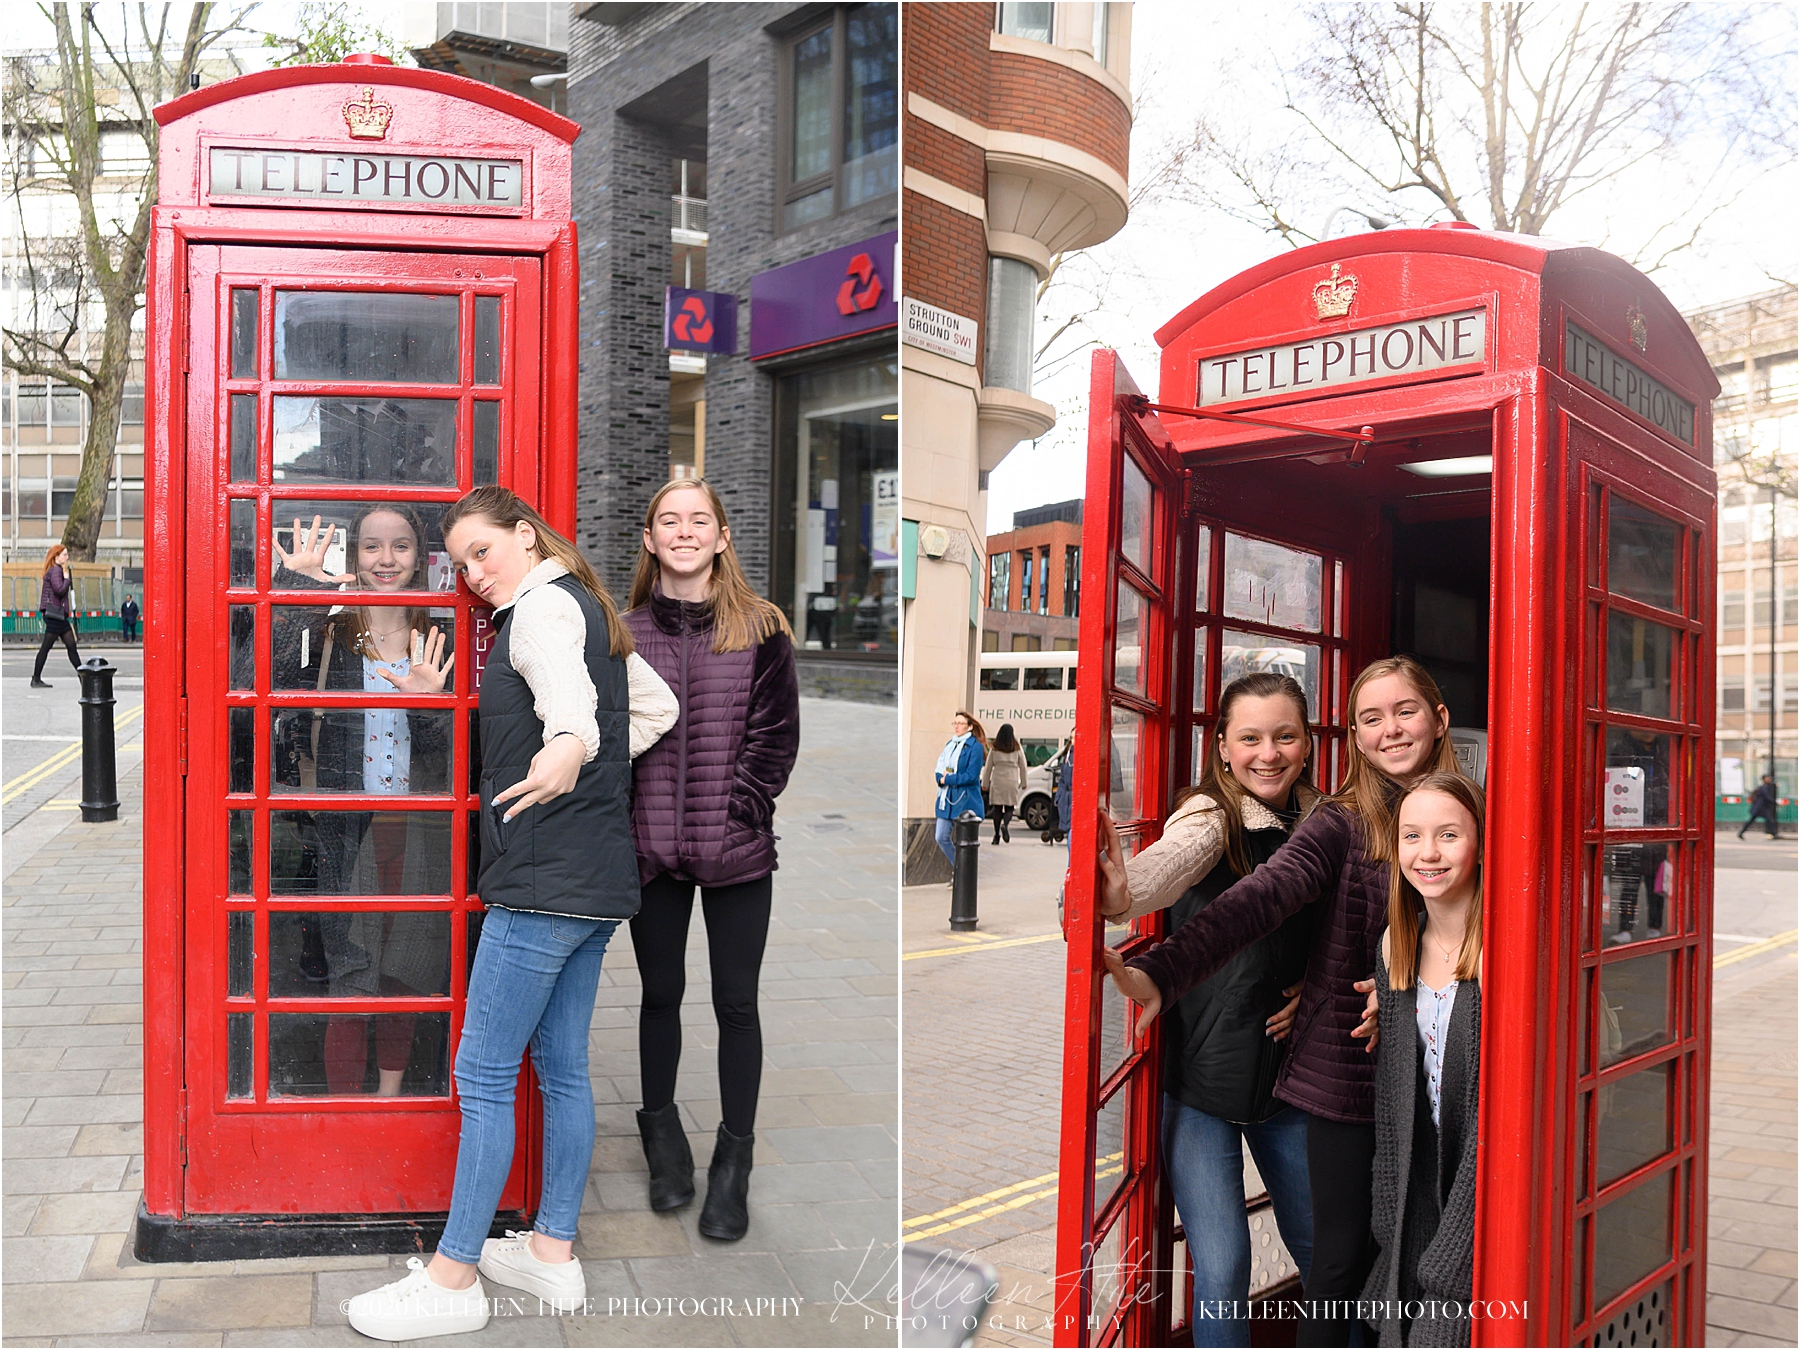 London phone booth with kids